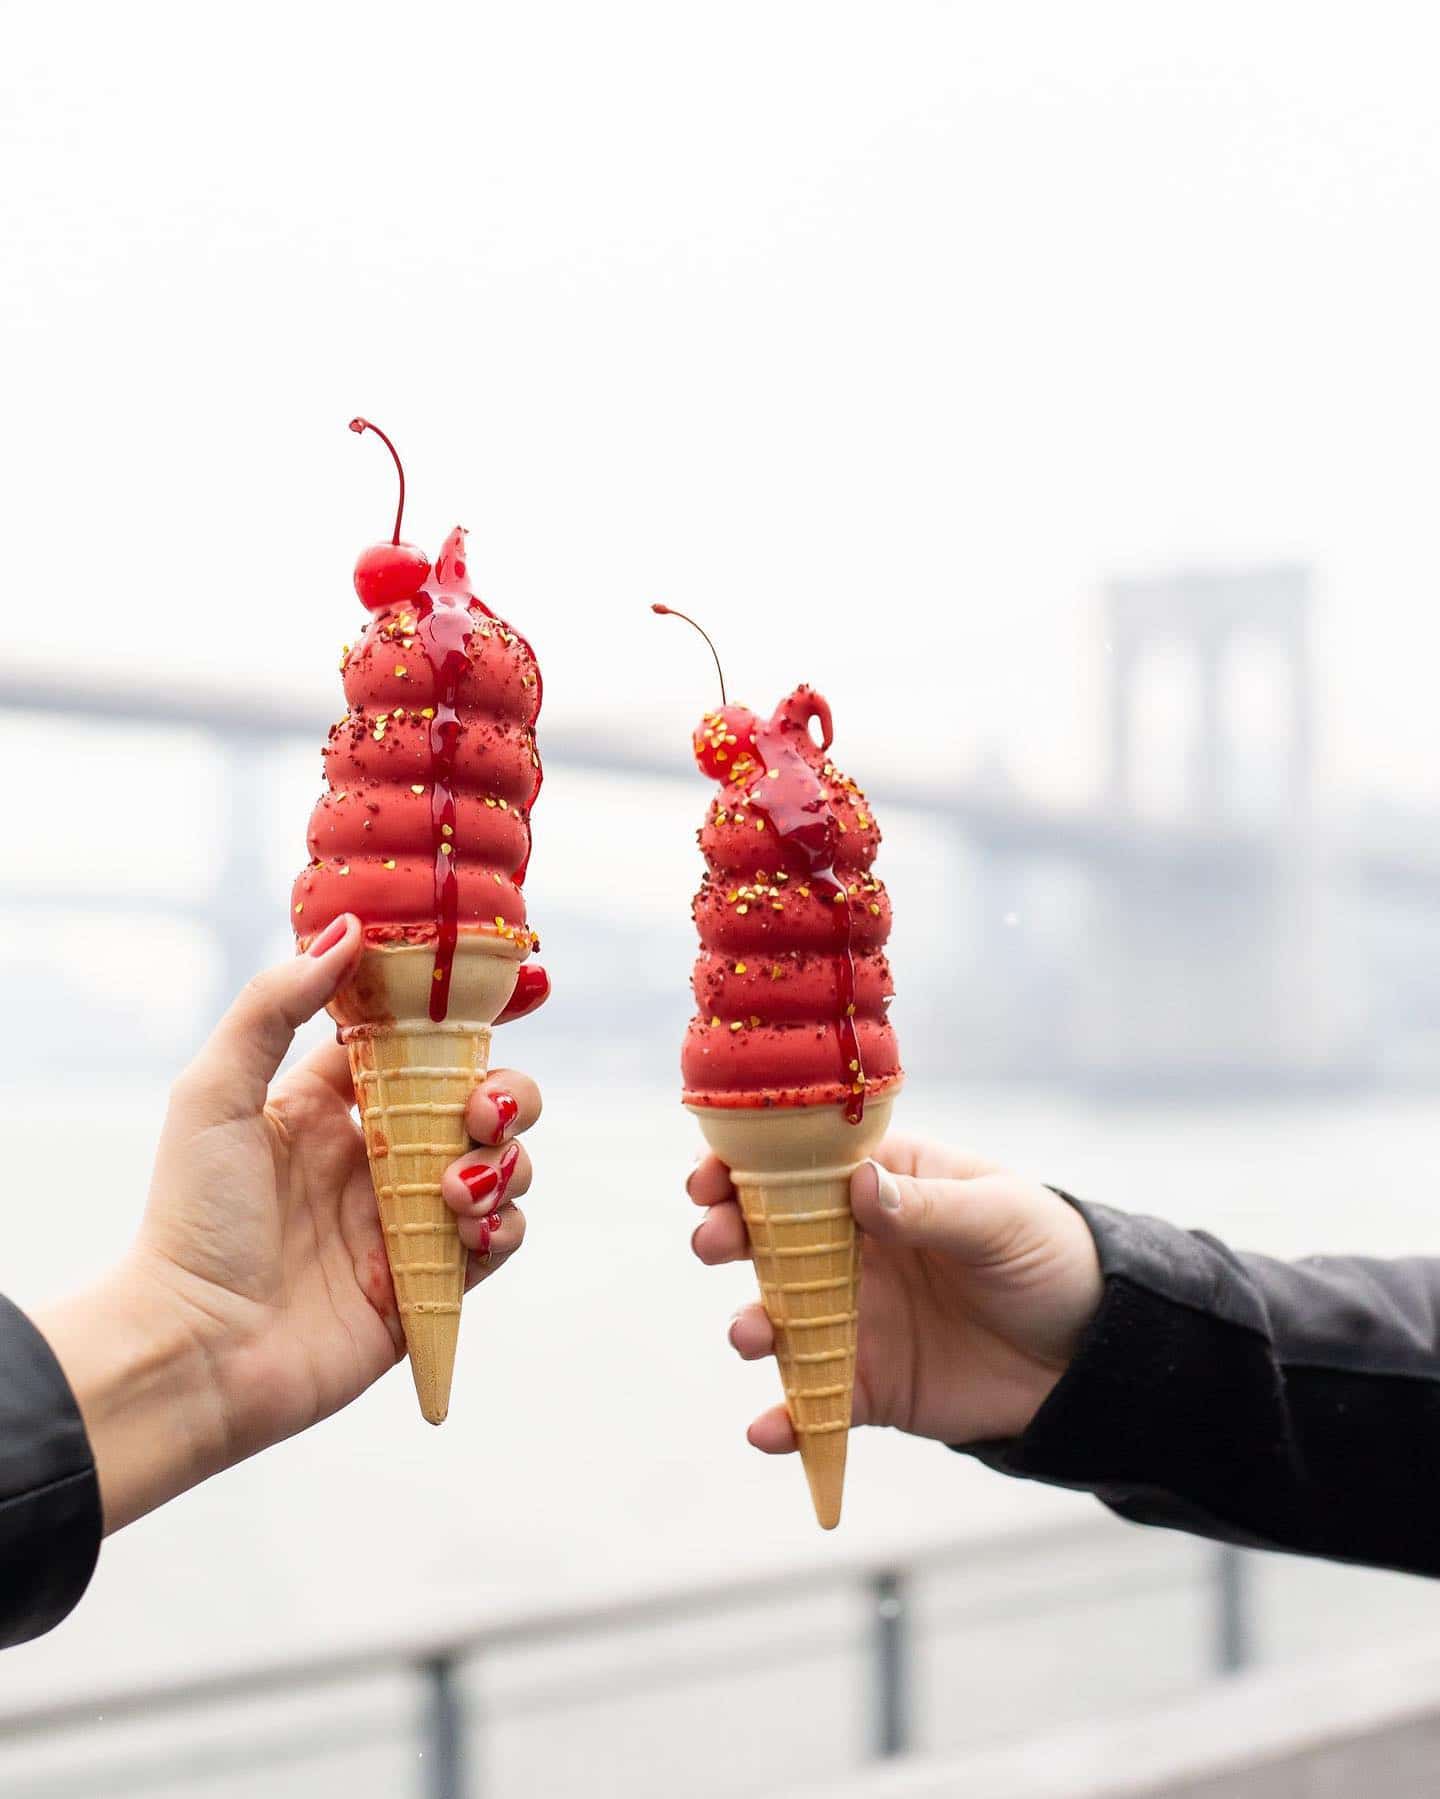 @eatmisterdips understood the assignment. Introducing “Love Dove” – the tastiest V-day treat ❥ #TheSeaport